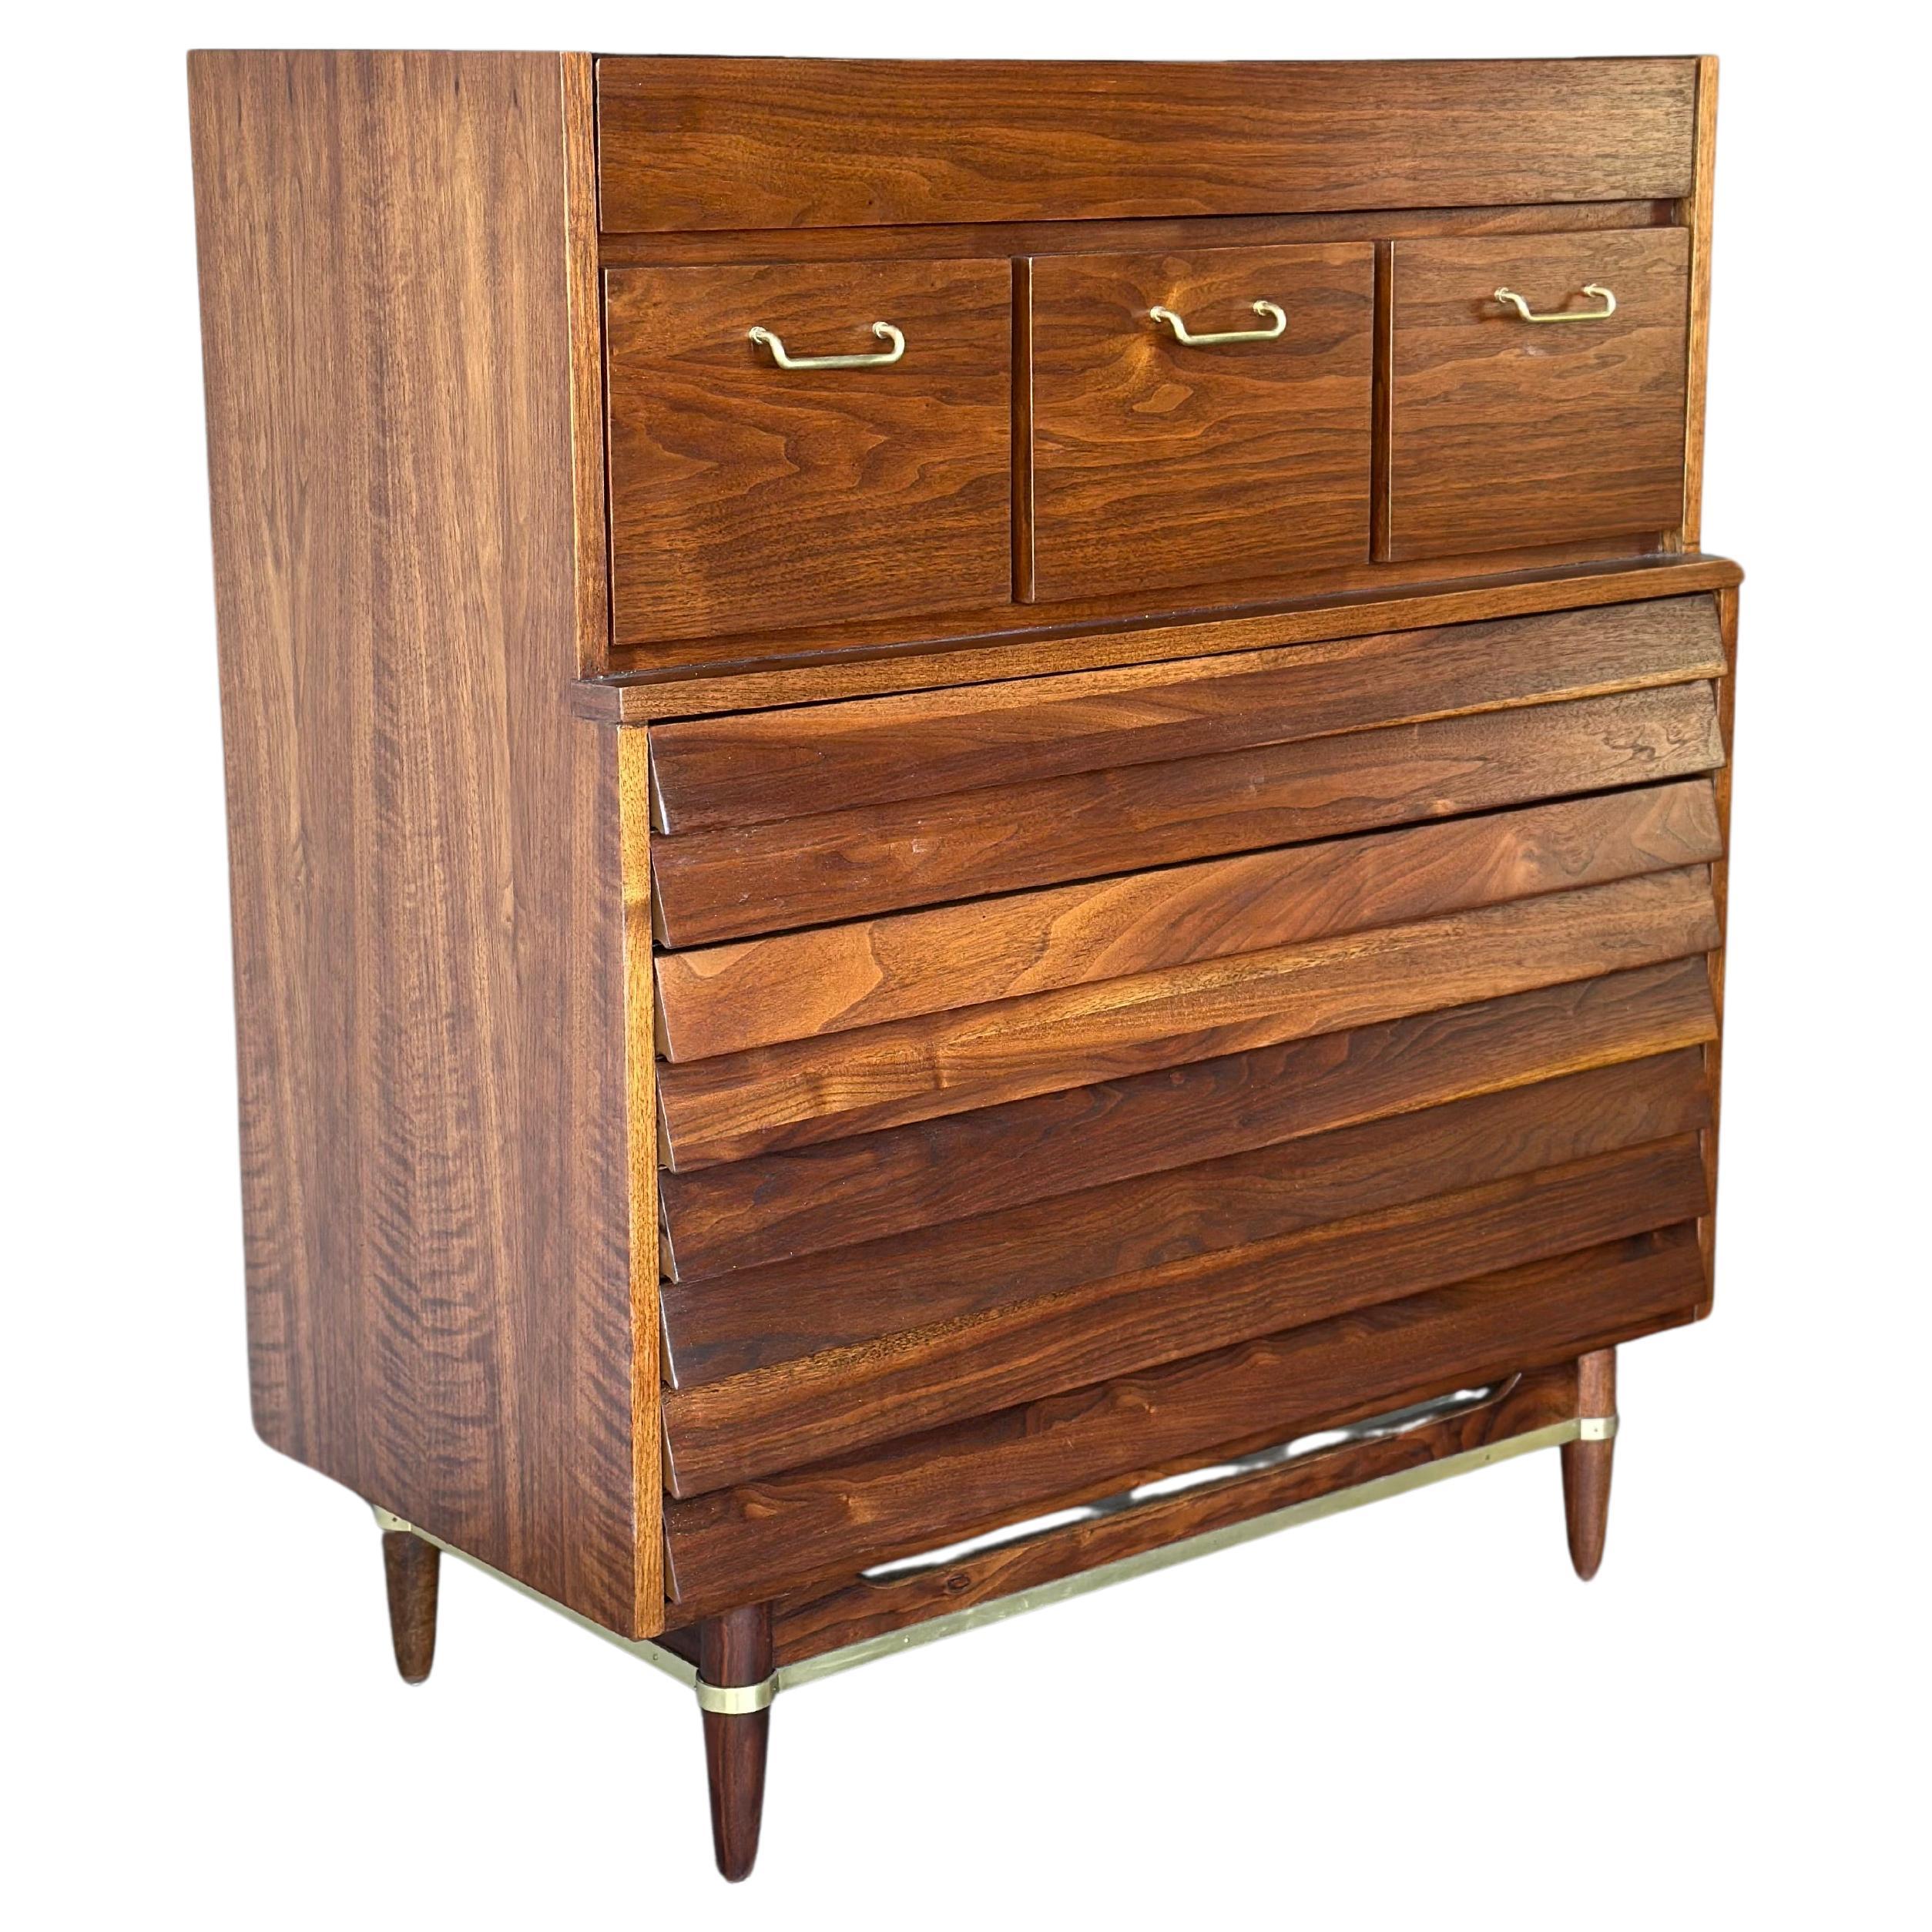 This professionally restored tall dresser, from American of Martinsville's 